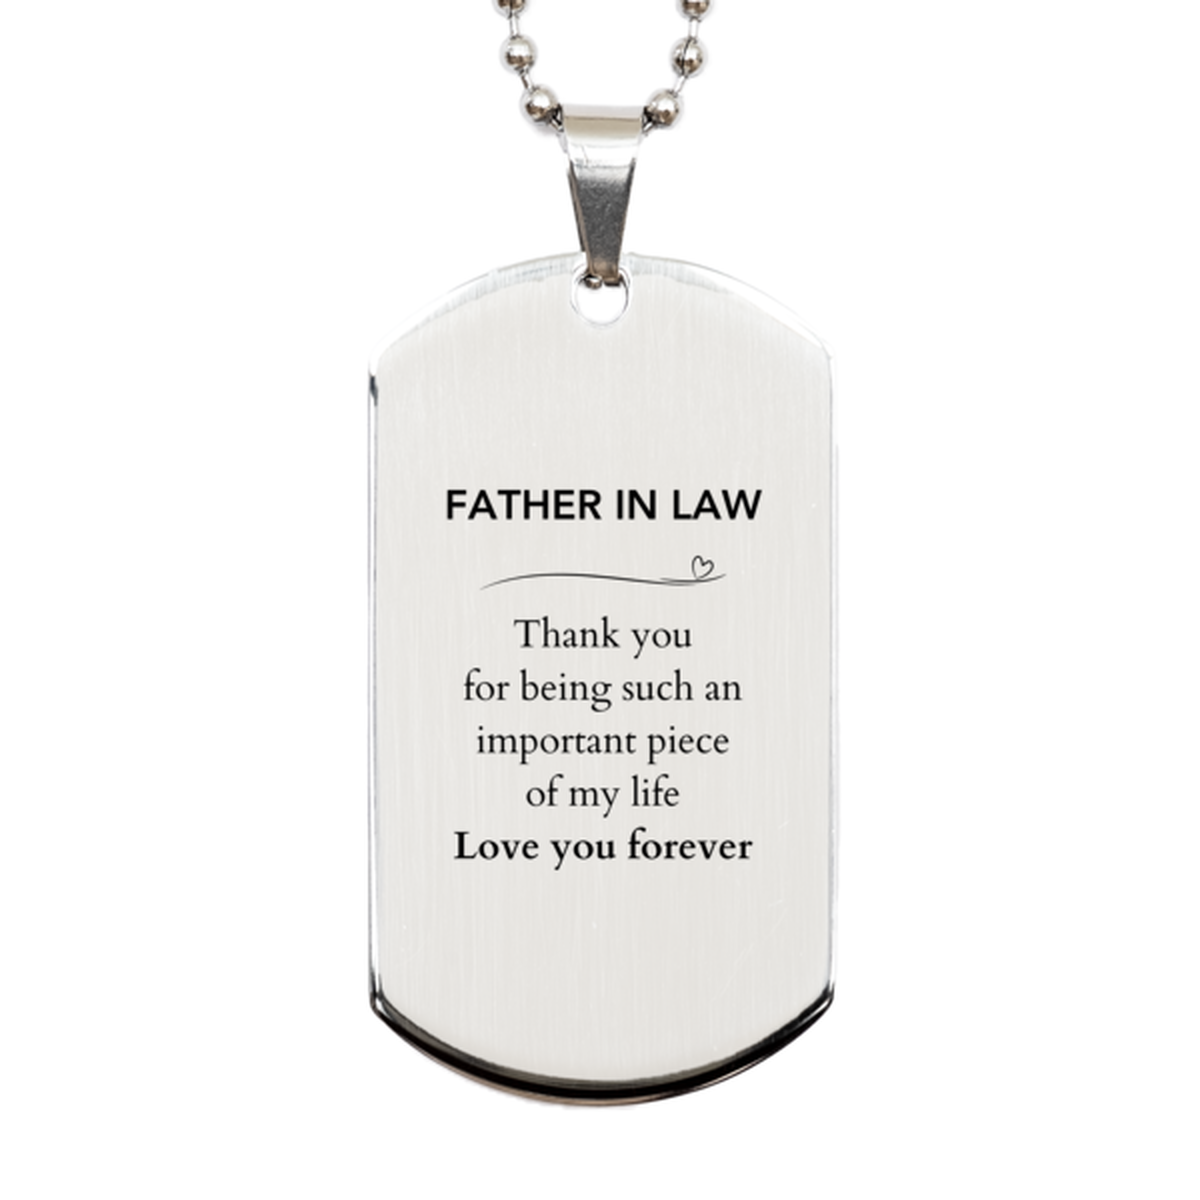 Appropriate Father In Law Silver Dog Tag Epic Birthday Gifts for Father In Law Thank you for being such an important piece of my life Father In Law Christmas Mothers Fathers Day